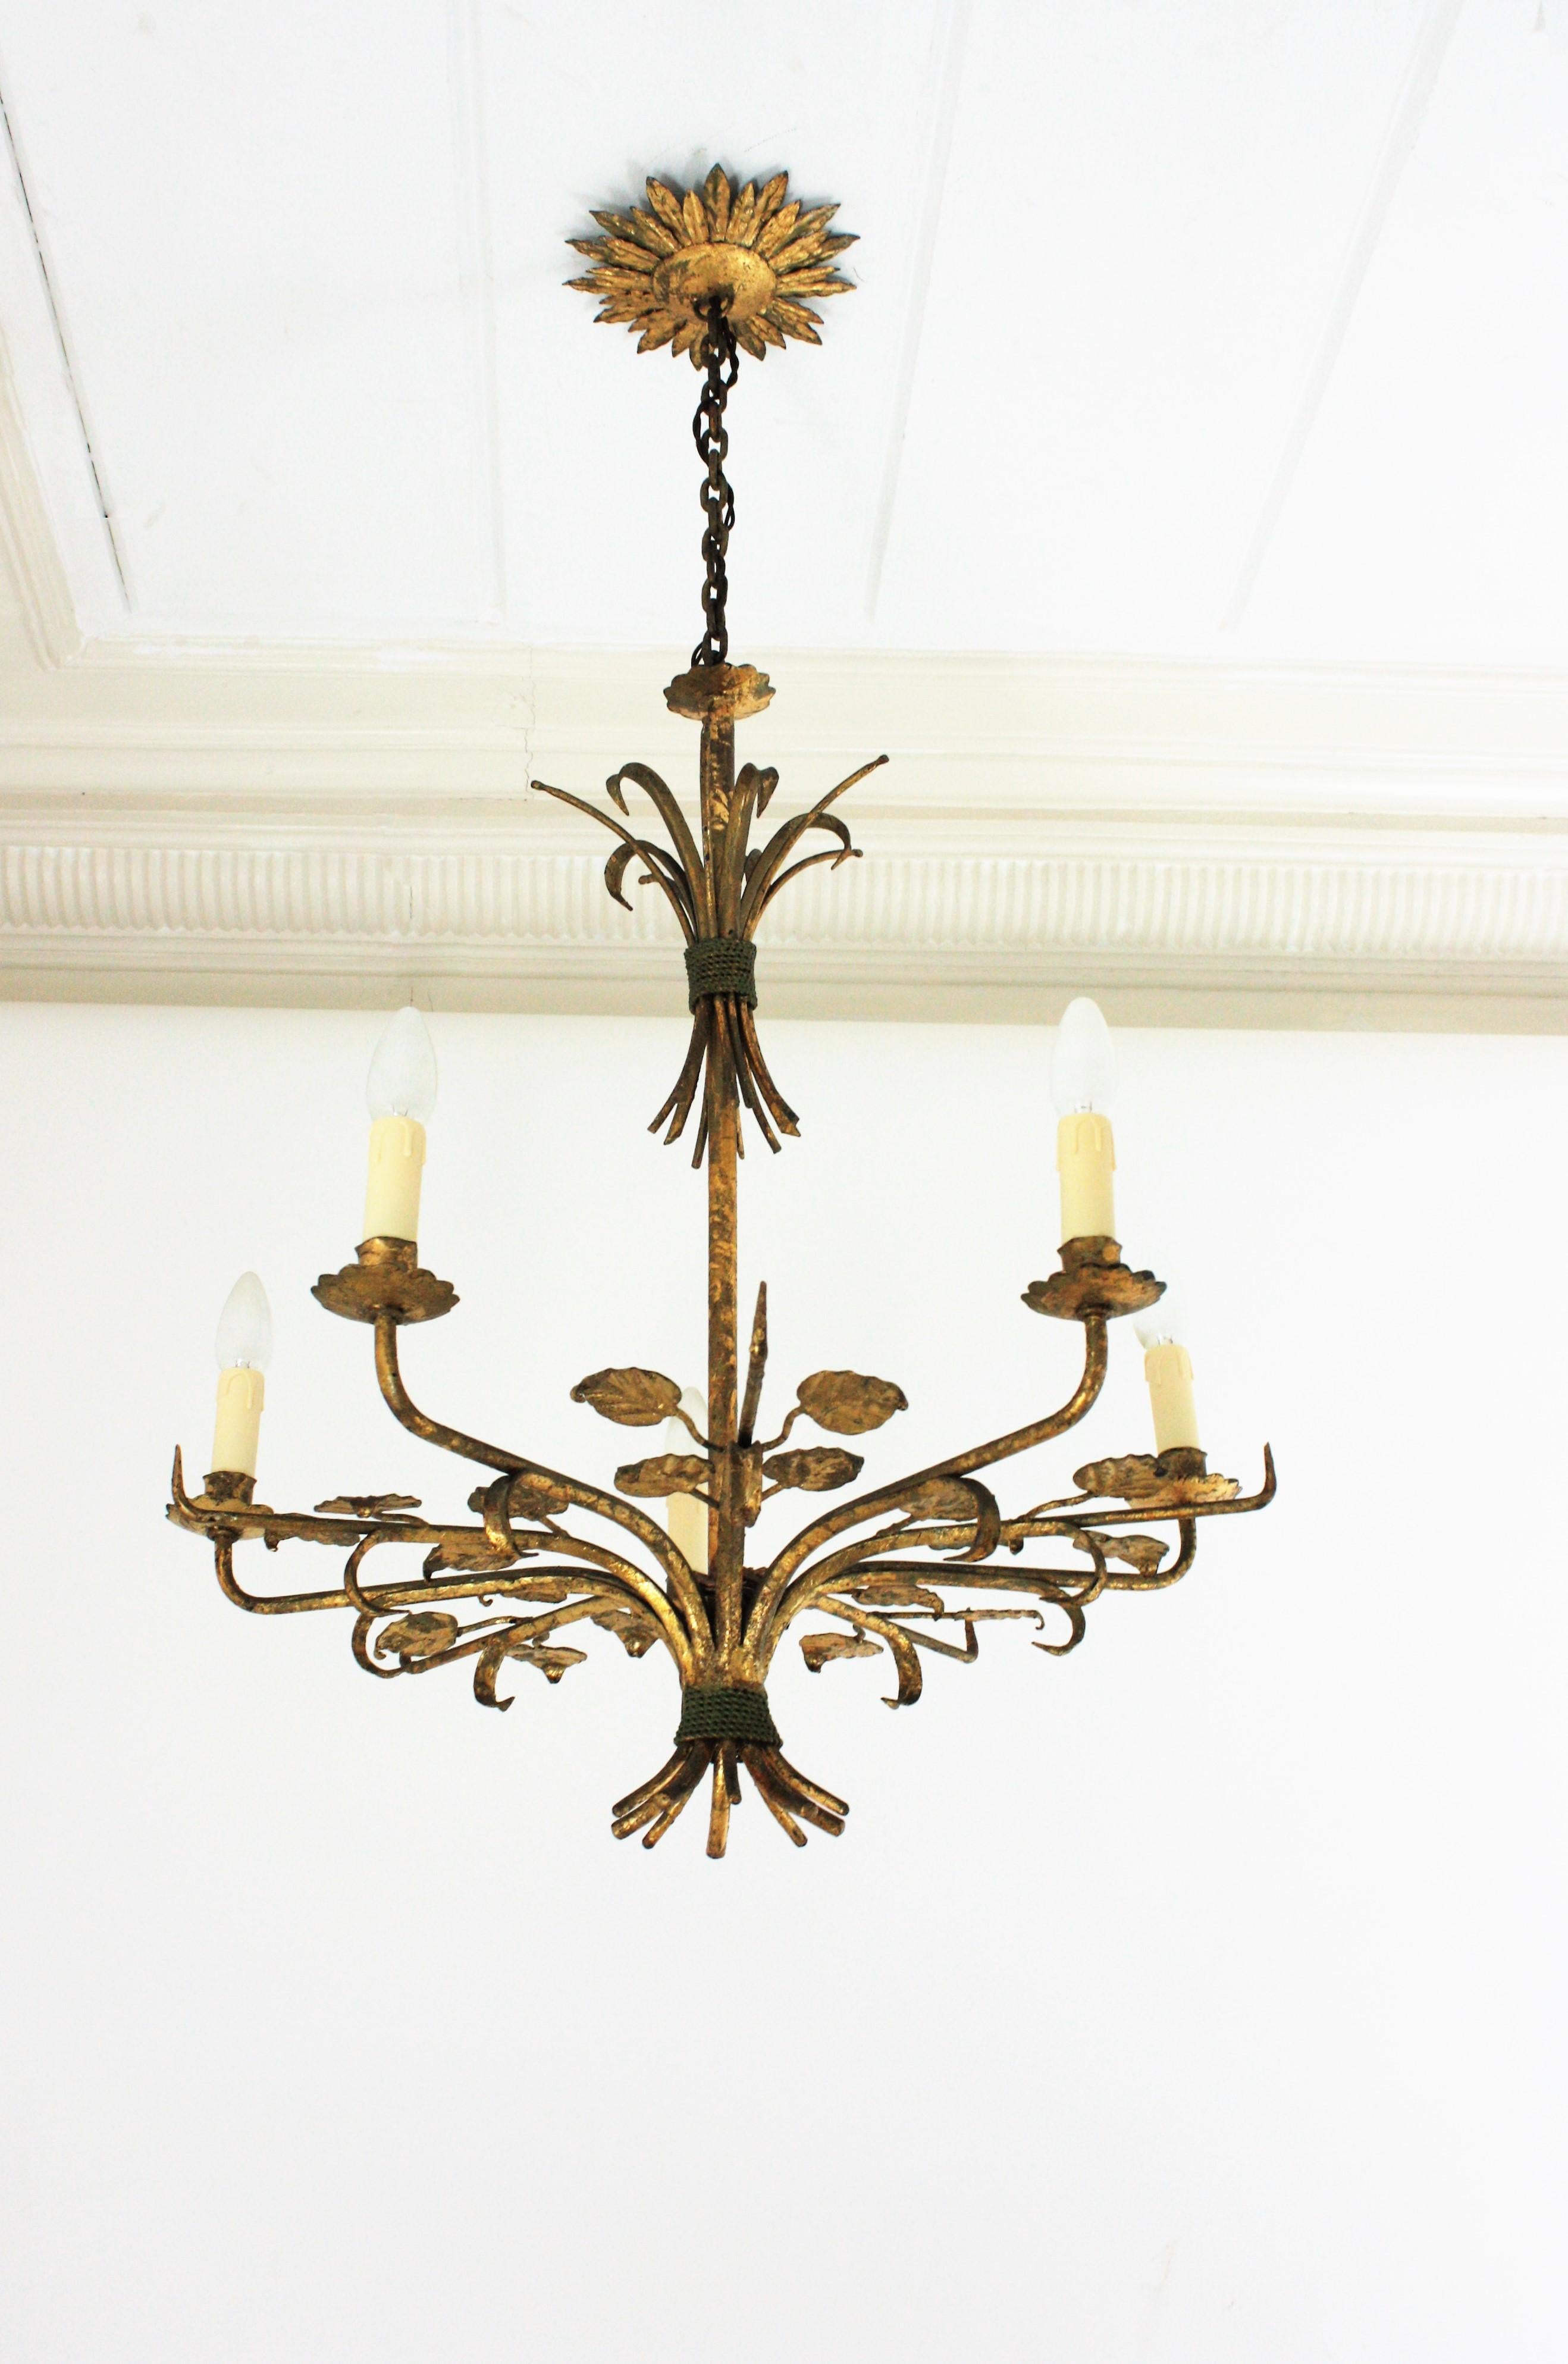 Foliage Chandelier with 5 arms, Gold Leaf, Wrought Iron, Spain, 1940s.
This stunning Hollywood Regency chandelier is entirely made by hand. It has a gilt wrought iron structure with 5 arms as branches in star shape or sunburst disposition. It has